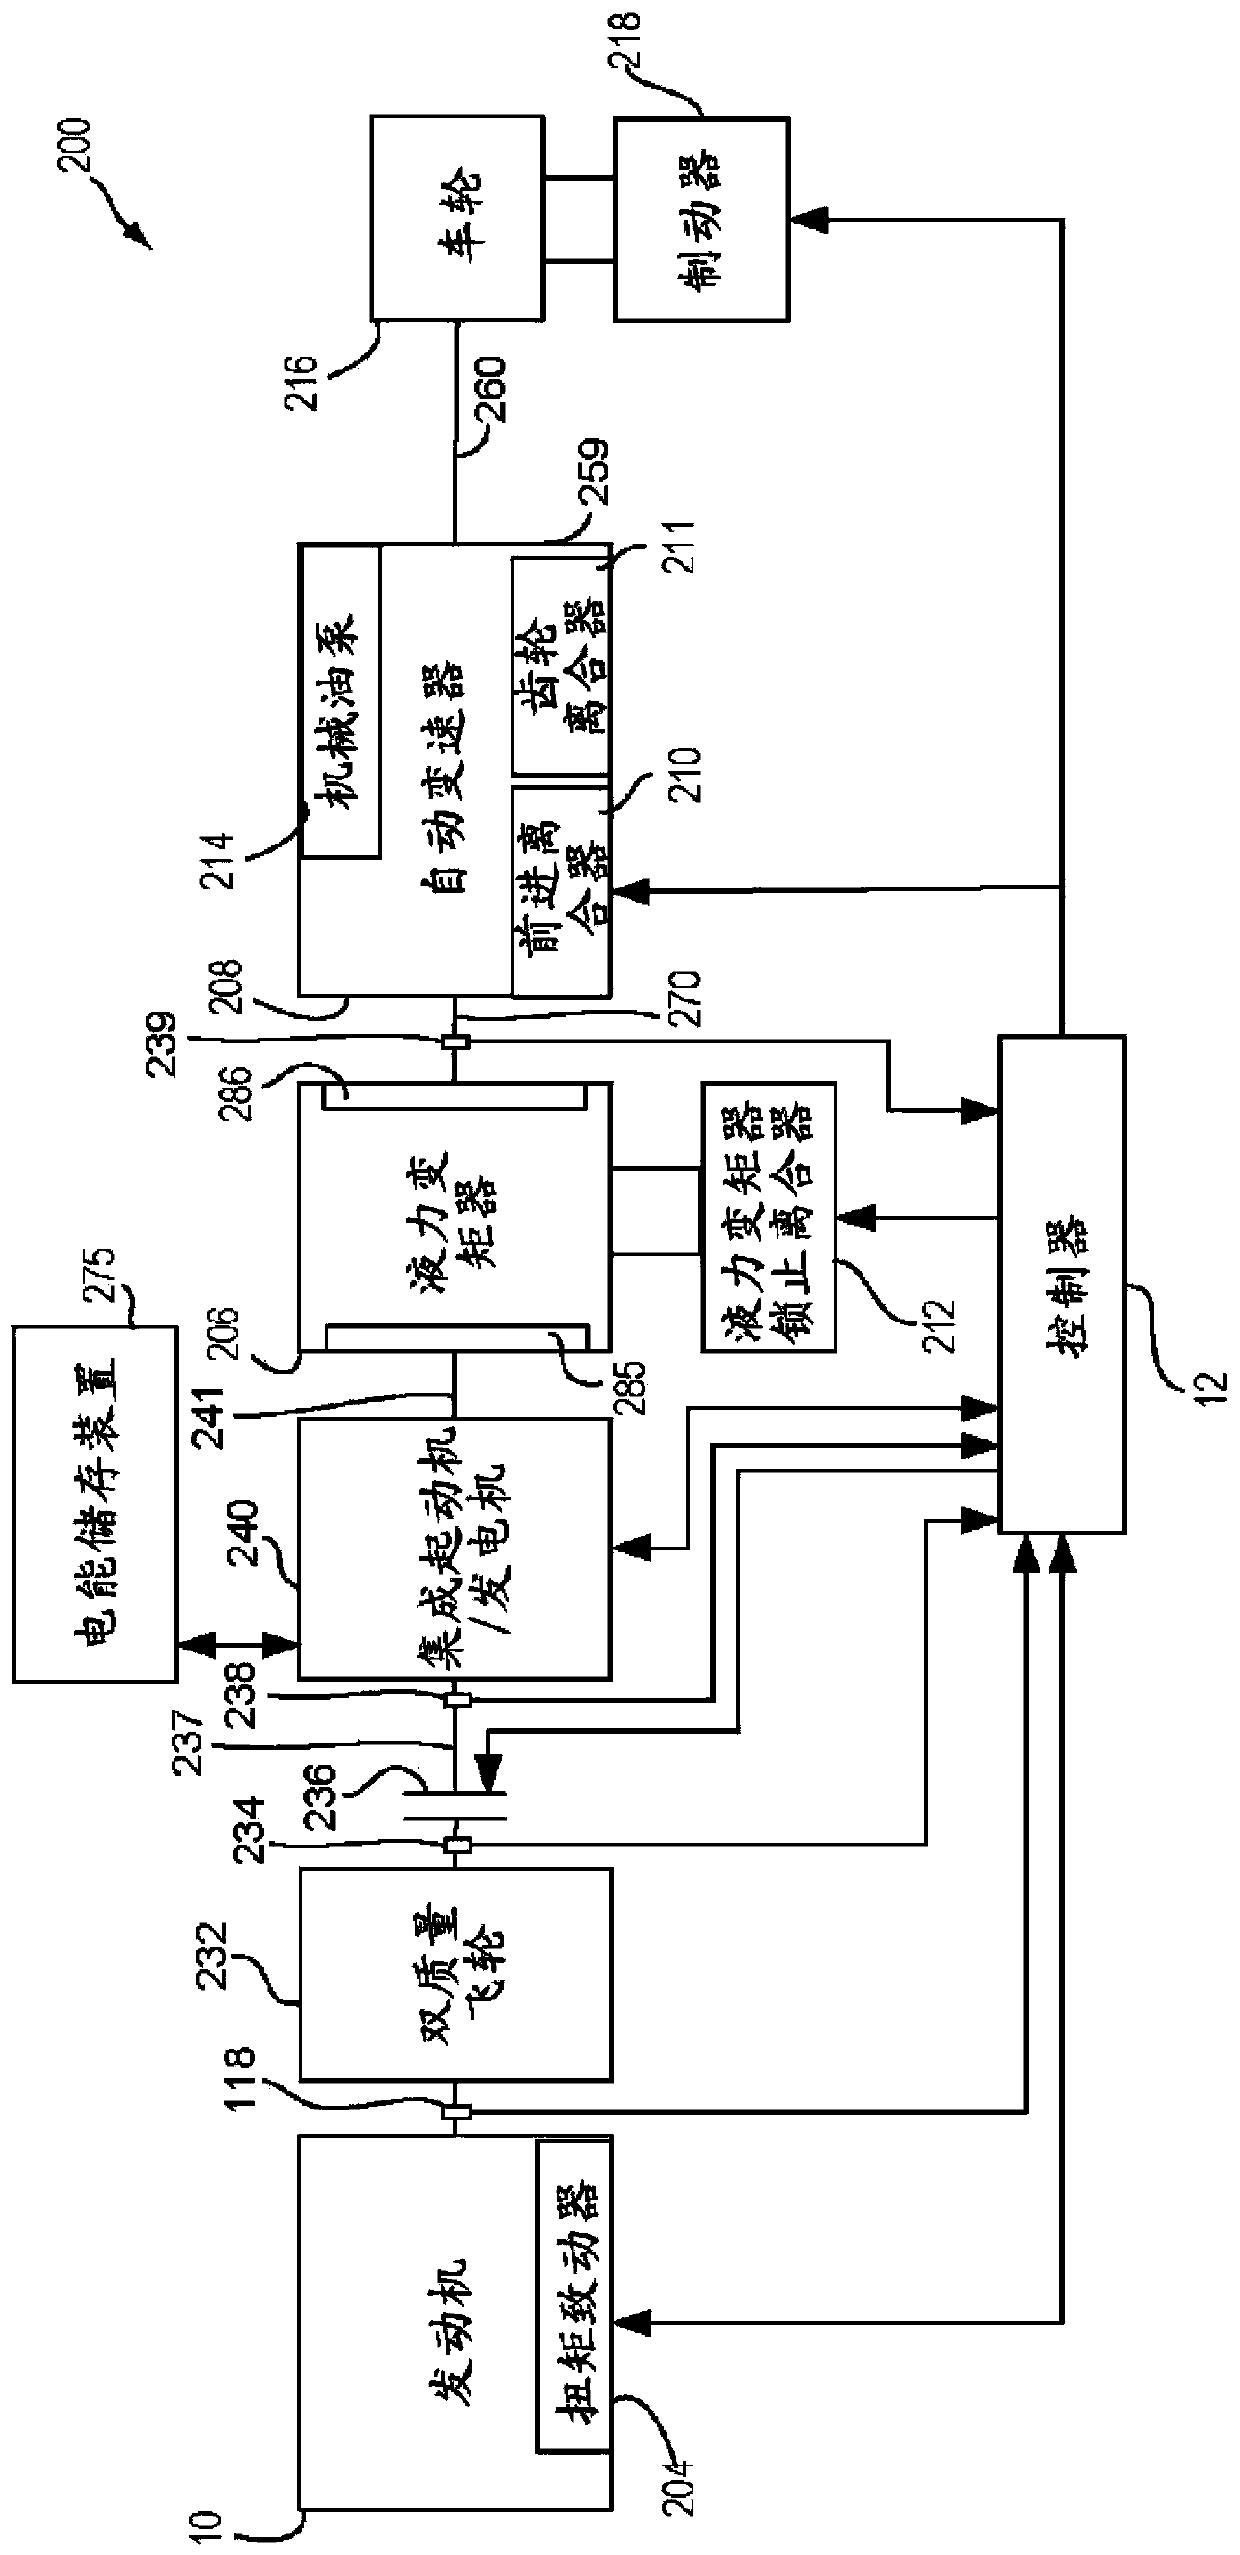 Method and system for hybrid electric vehicle